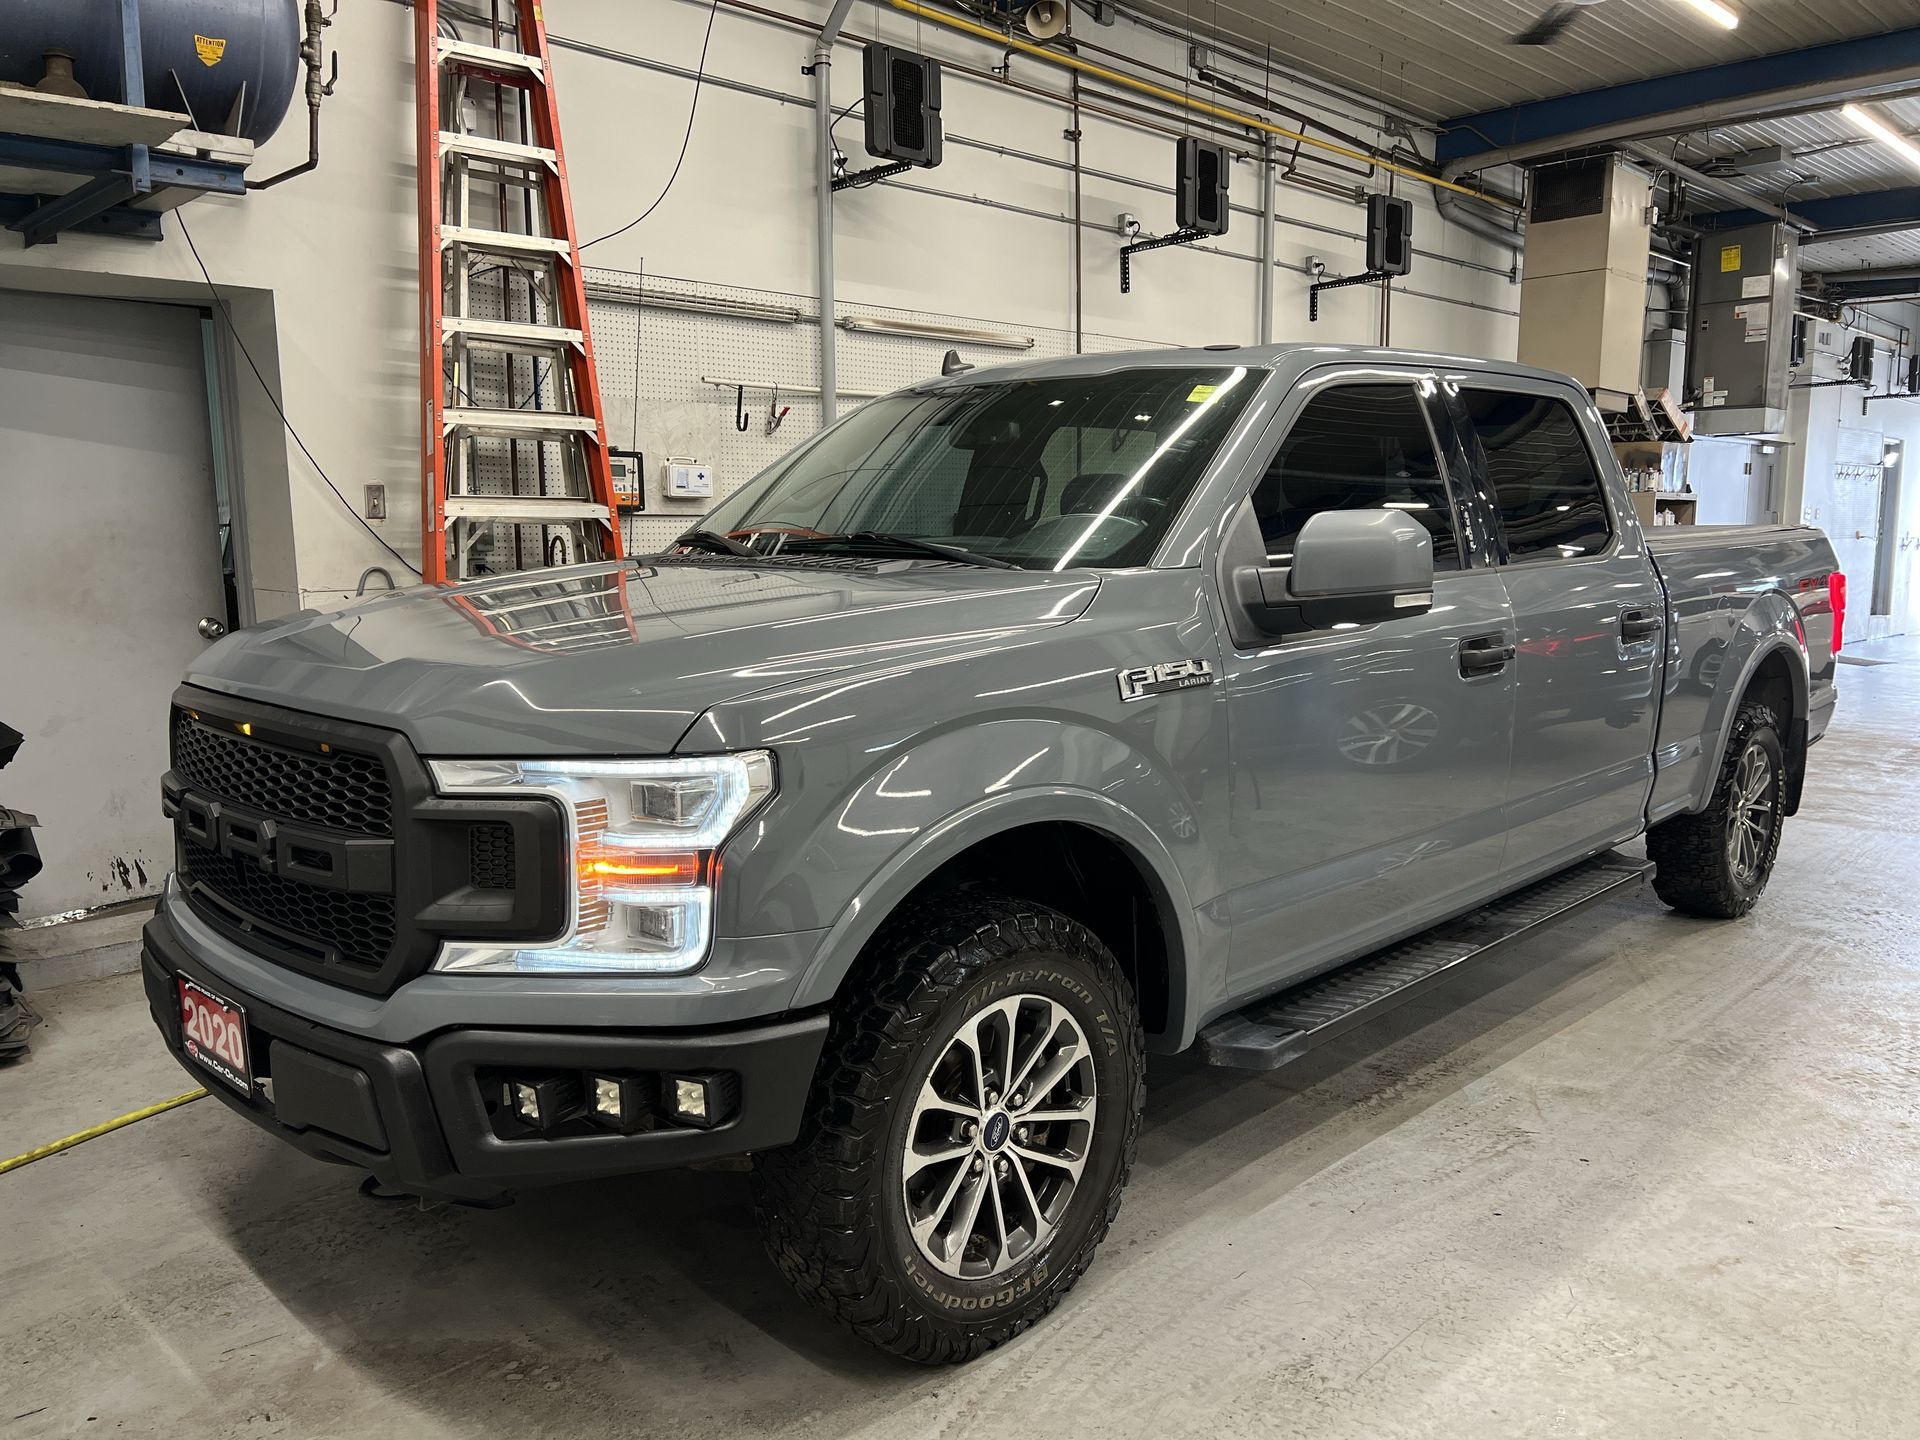 2020 Ford F-150 LARIAT | 5.0L V8 | LUXURY PKG | PANO ROOF |LEATHER